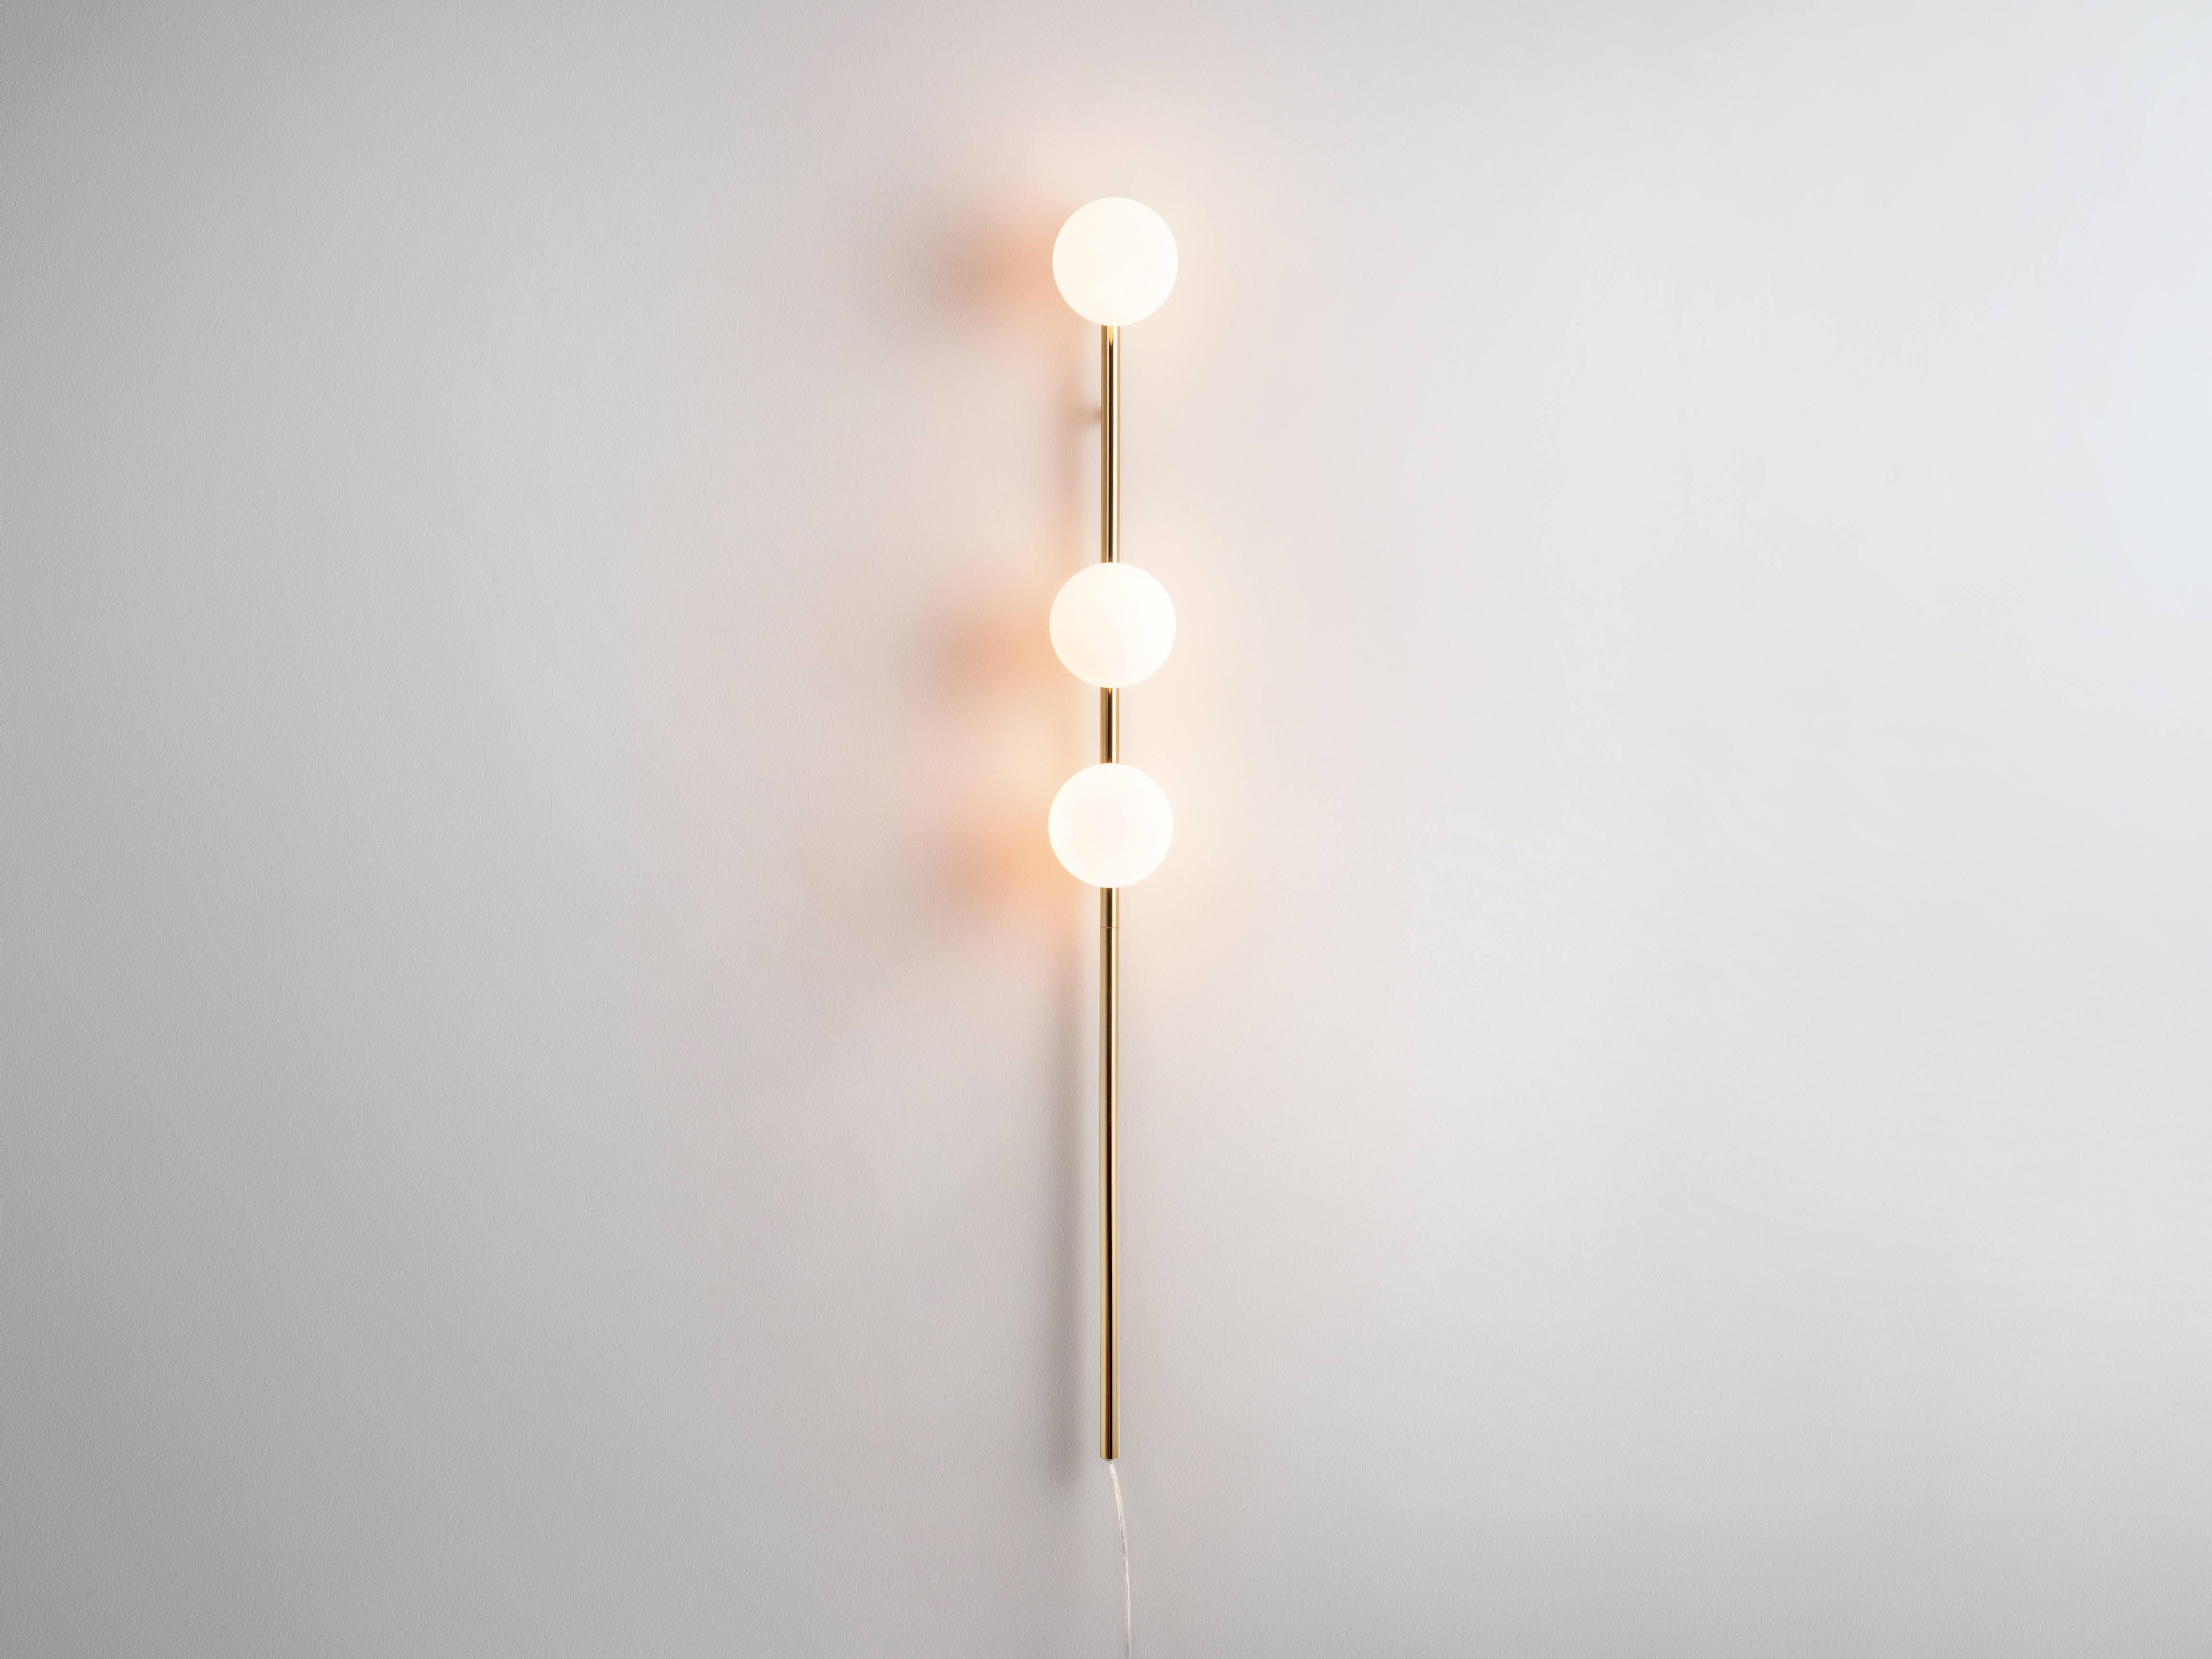 A perfect space saving light our bold polished brass bar opal ball wall light. With the power of a floor lamp but without the footprint, the metal bar holds three opal glass shades, which diffuse a soft, illuminating glow over your living spaces;